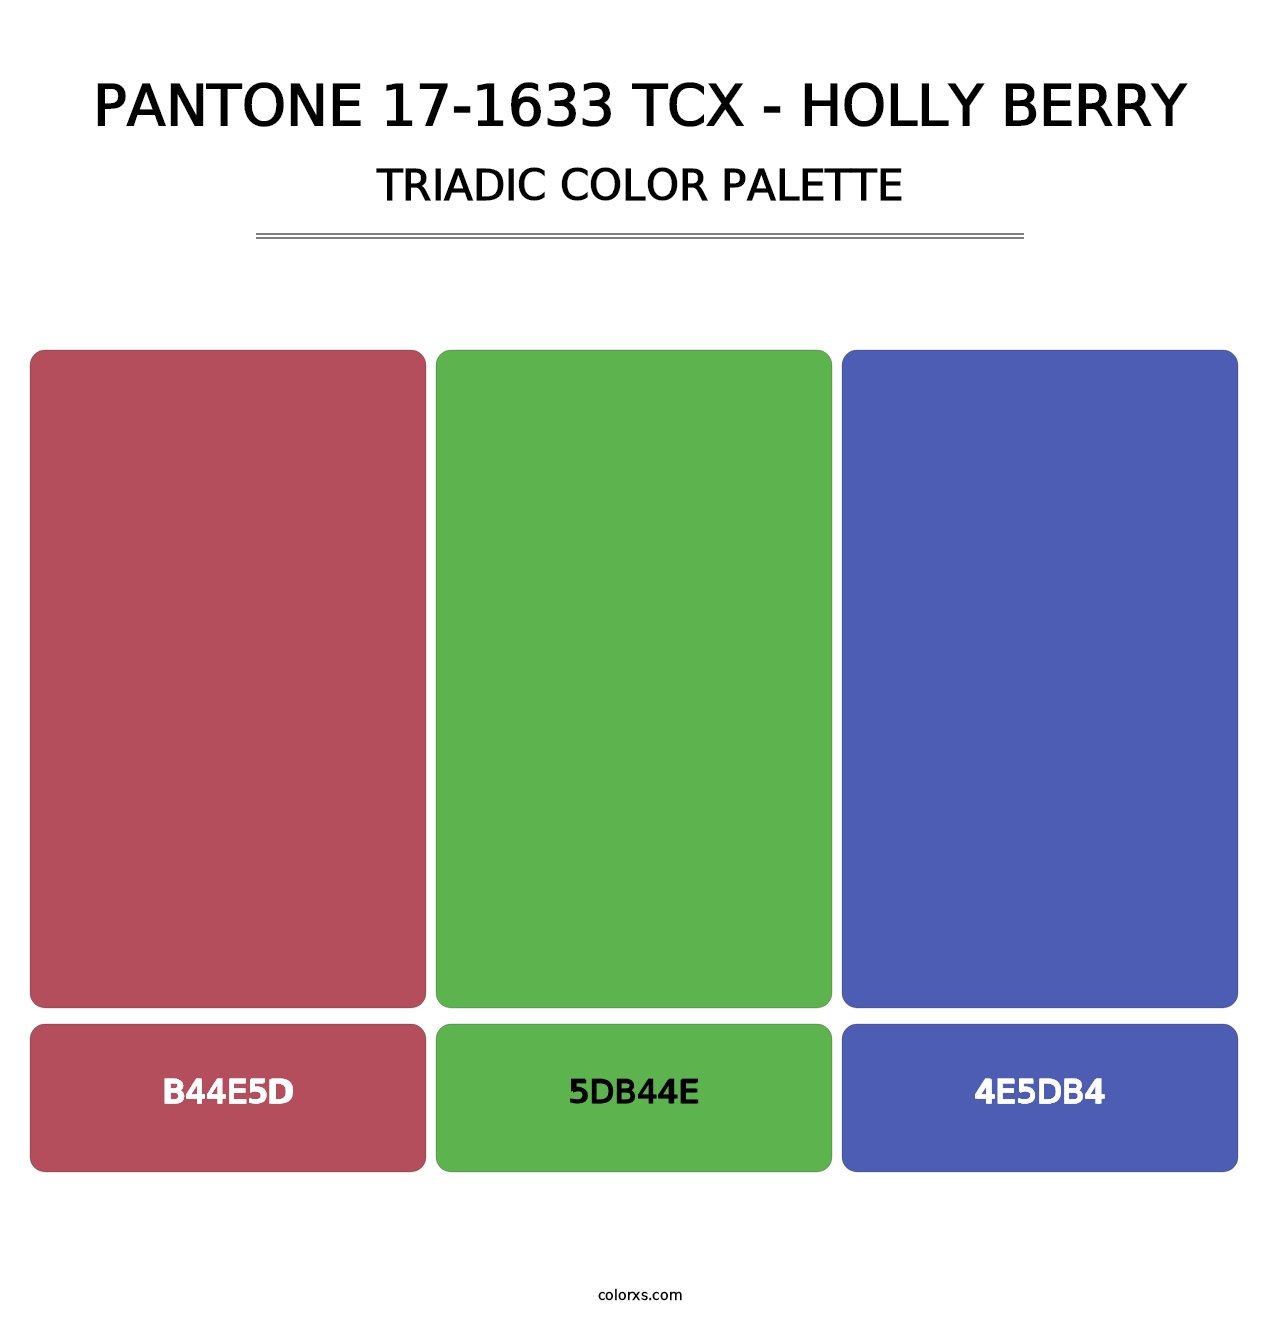 PANTONE 17-1633 TCX - Holly Berry - Triadic Color Palette